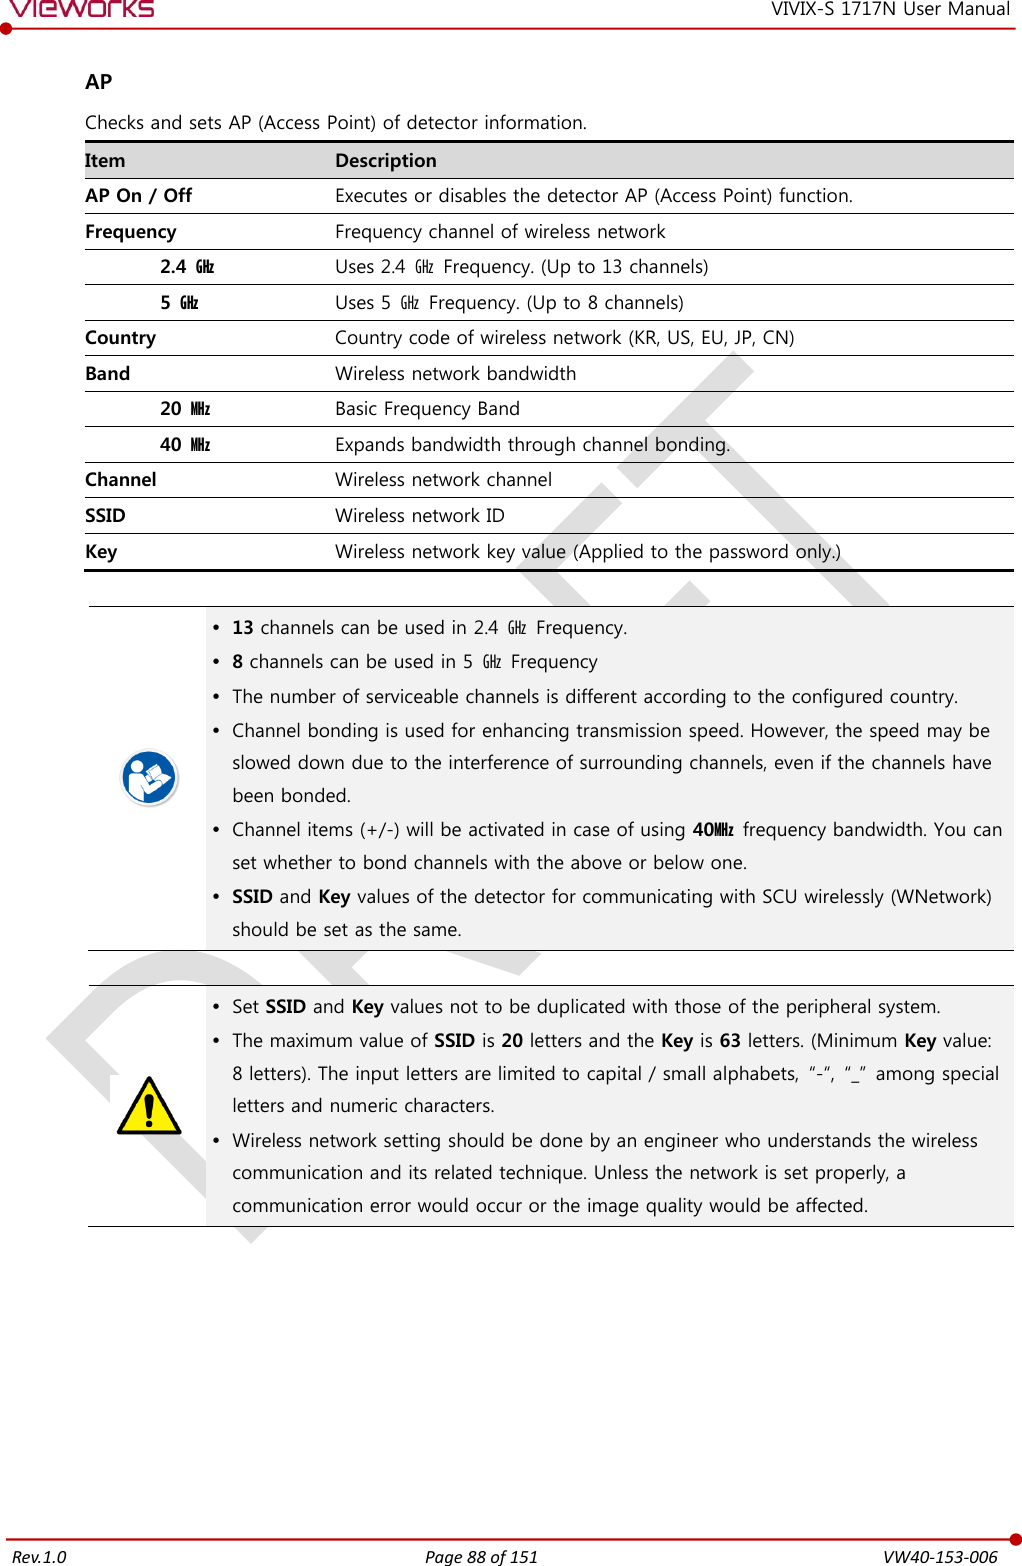   Rev.1.0 Page 88 of 151  VW40-153-006 VIVIX-S 1717N User Manual  AP Checks and sets AP (Access Point) of detector information. Item Description AP On / Off Executes or disables the detector AP (Access Point) function. Frequency Frequency channel of wireless network 2.4  ㎓ Uses 2.4 ㎓  Frequency. (Up to 13 channels) 5  ㎓ Uses 5 ㎓ Frequency. (Up to 8 channels) Country Country code of wireless network (KR, US, EU, JP, CN) Band Wireless network bandwidth 20 ㎒ Basic Frequency Band 40 ㎒ Expands bandwidth through channel bonding. Channel Wireless network channel SSID Wireless network ID Key Wireless network key value (Applied to the password only.)    13 channels can be used in 2.4 ㎓ Frequency.  8 channels can be used in 5  ㎓  Frequency  The number of serviceable channels is different according to the configured country.  Channel bonding is used for enhancing transmission speed. However, the speed may be slowed down due to the interference of surrounding channels, even if the channels have been bonded.  Channel items (+/-) will be activated in case of using 40㎒ frequency bandwidth. You can set whether to bond channels with the above or below one.  SSID and Key values of the detector for communicating with SCU wirelessly (WNetwork) should be set as the same.    Set SSID and Key values not to be duplicated with those of the peripheral system.  The maximum value of SSID is 20 letters and the Key is 63 letters. (Minimum Key value: 8 letters). The input letters are limited to capital / small alphabets,  “-“,  “_”  among special letters and numeric characters.  Wireless network setting should be done by an engineer who understands the wireless communication and its related technique. Unless the network is set properly, a communication error would occur or the image quality would be affected.         